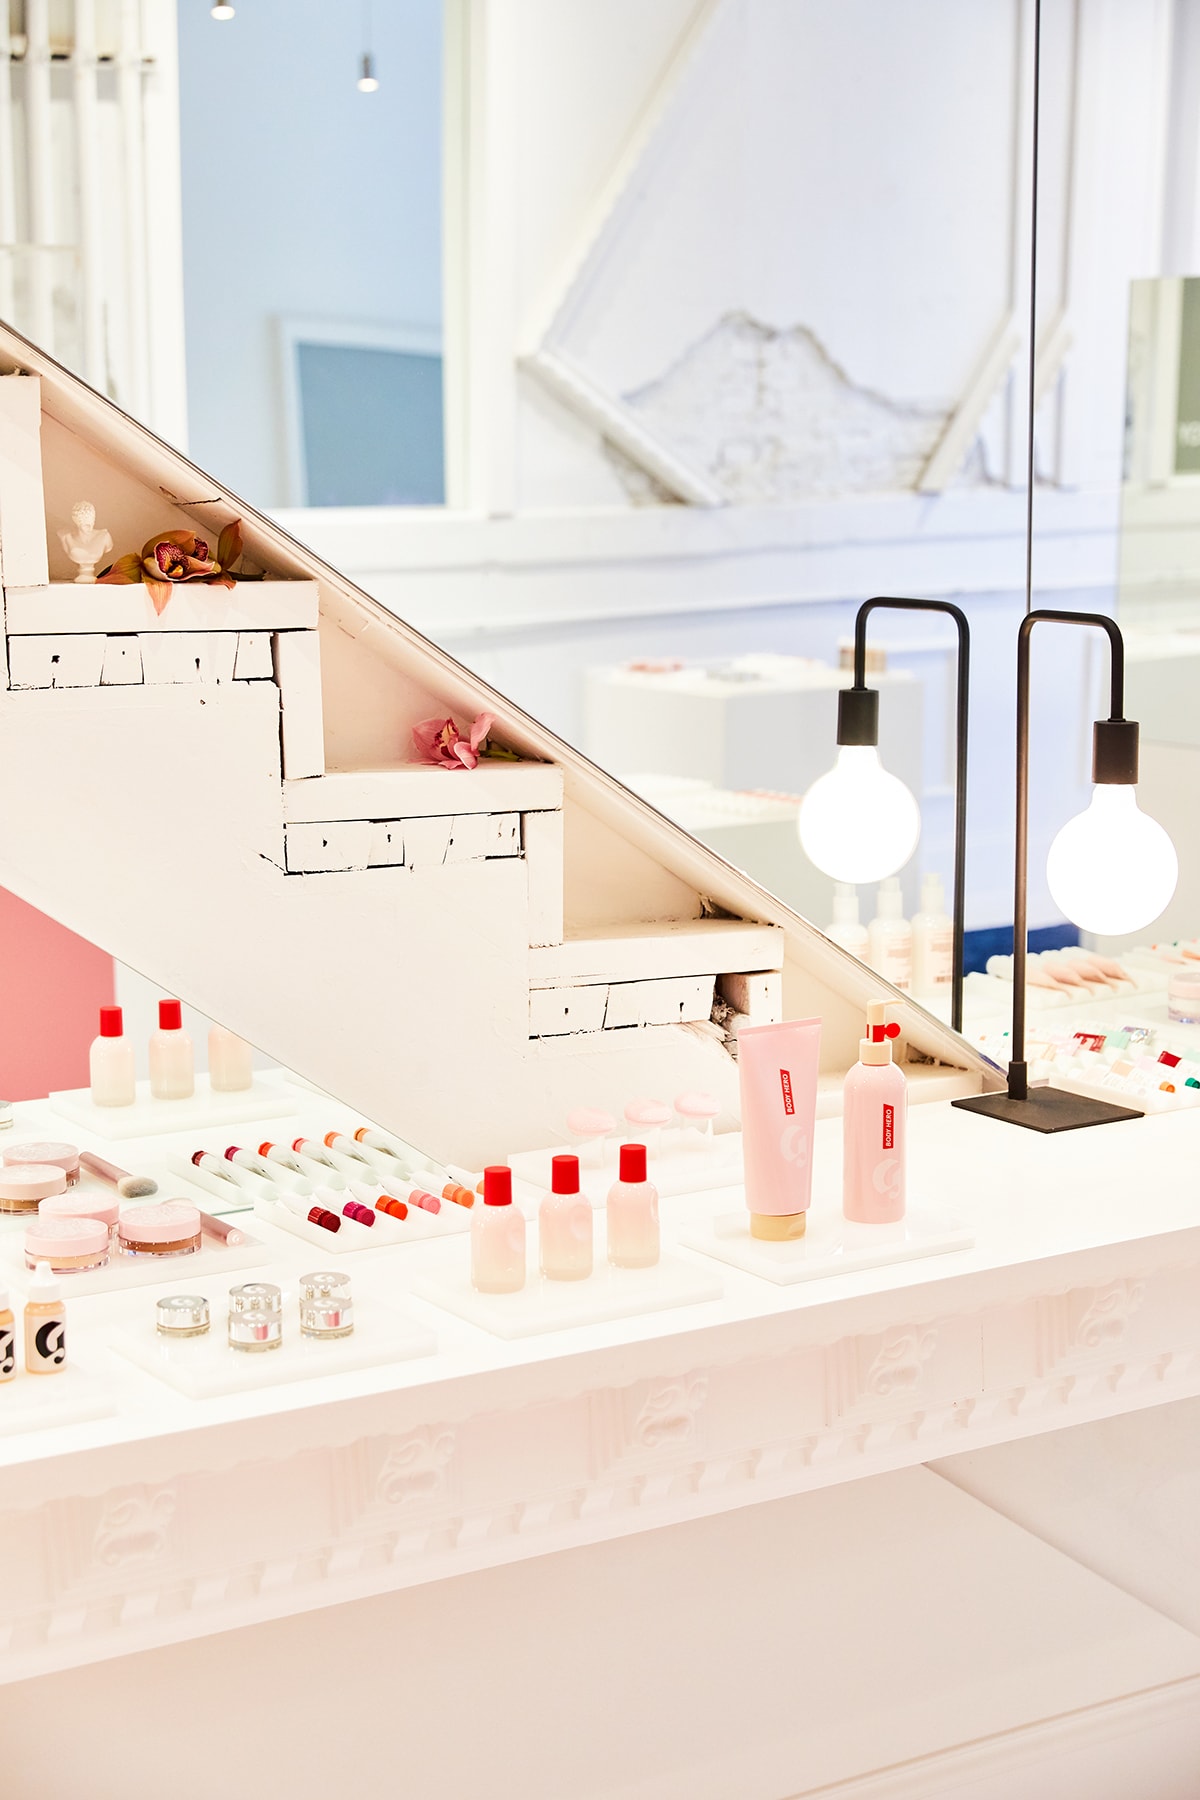 Glossier Chicago Retail Experience Pop-Up Shop Store August 23 Makeup Skincare Beauty Emily Weiss Interior